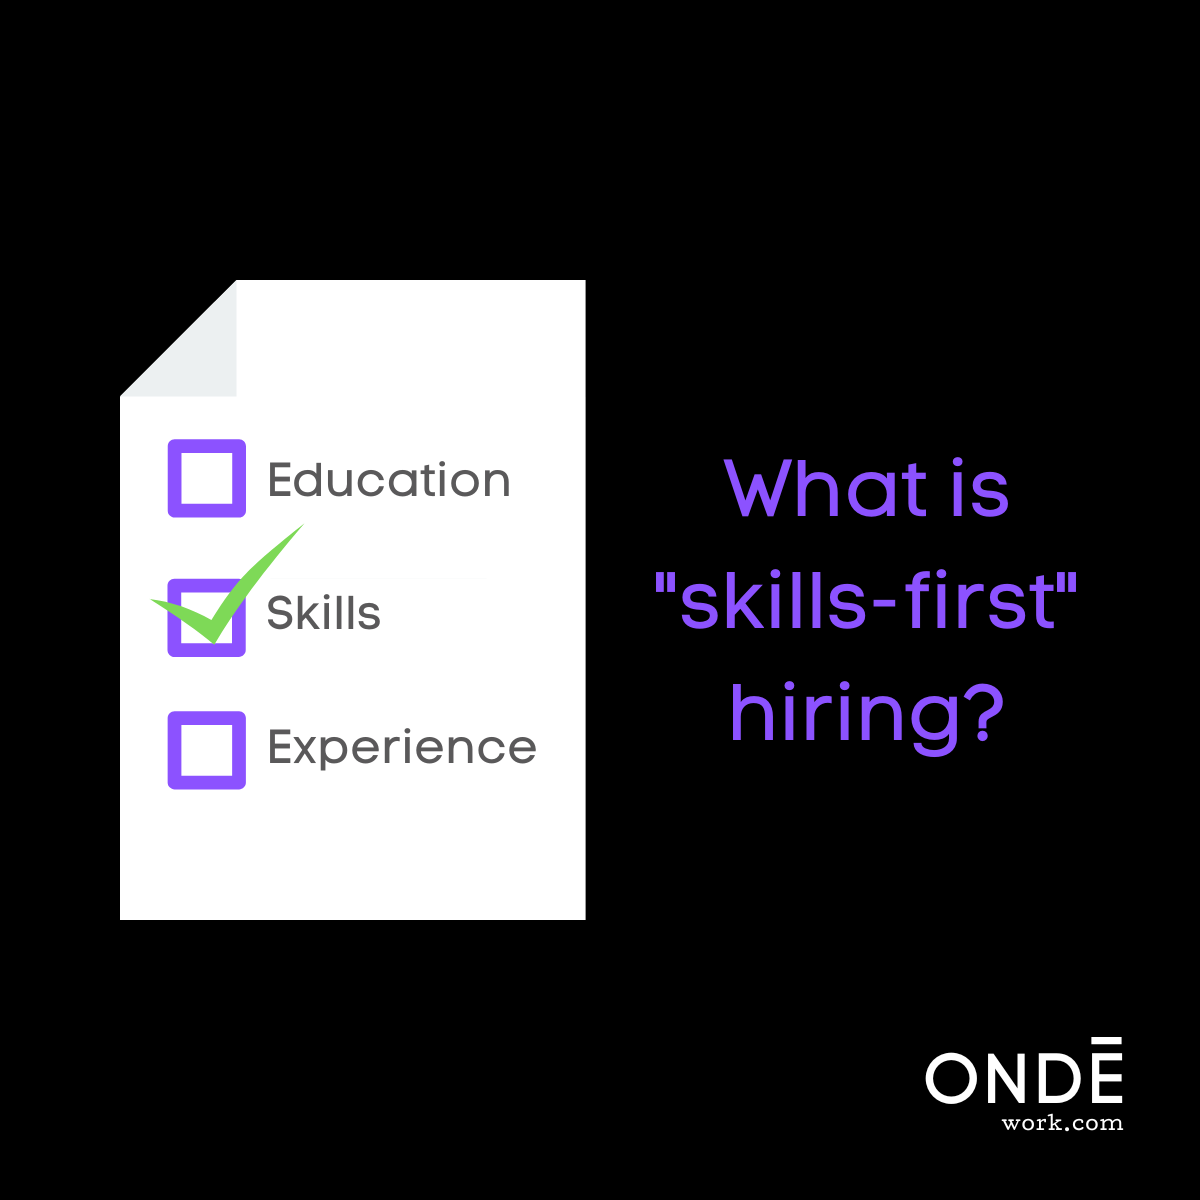 What is skills-first hiring?